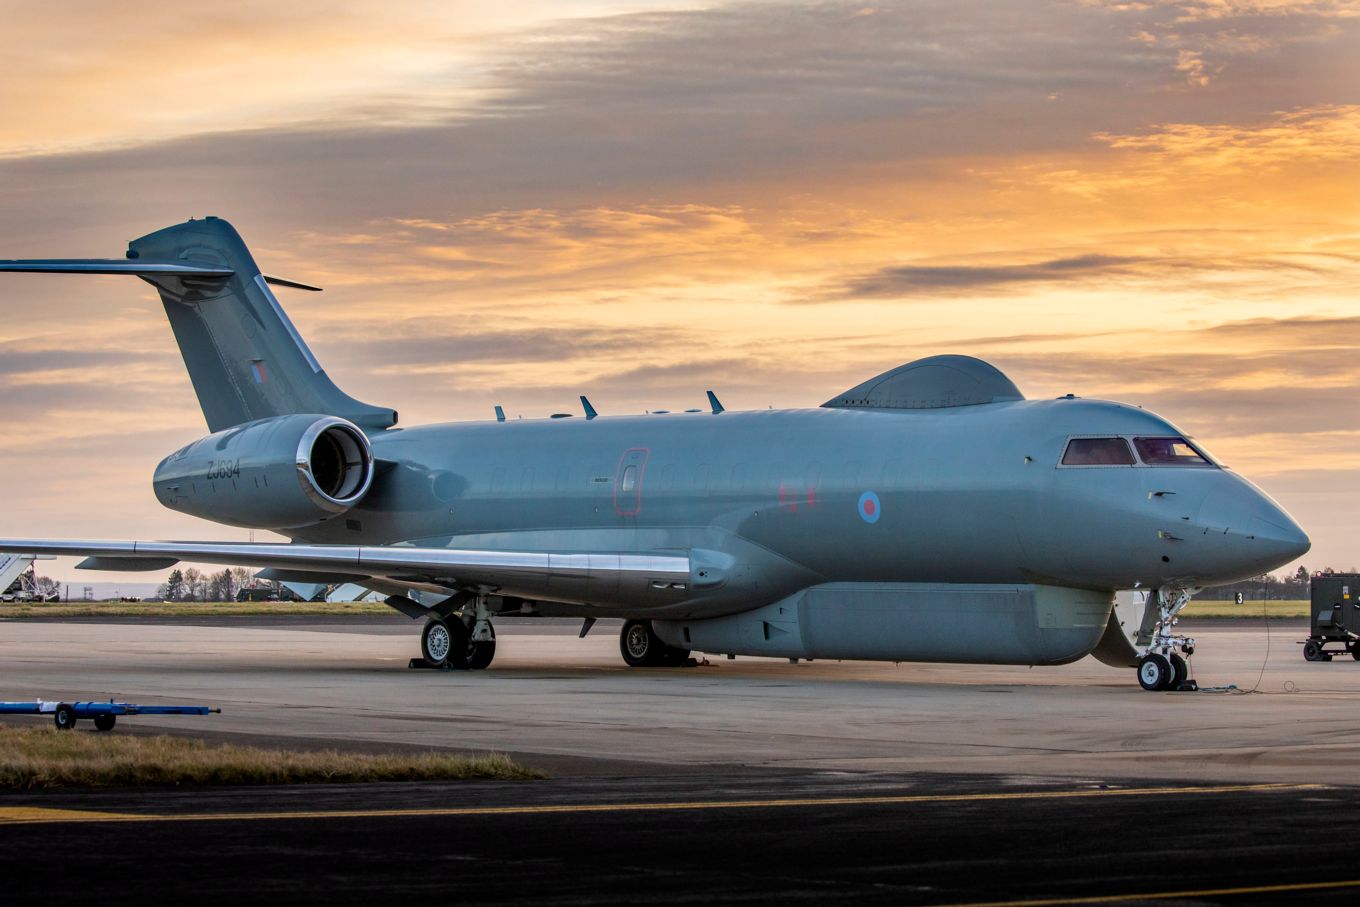 Image shows an RAF Sentinel R1 aircraft on the ground.